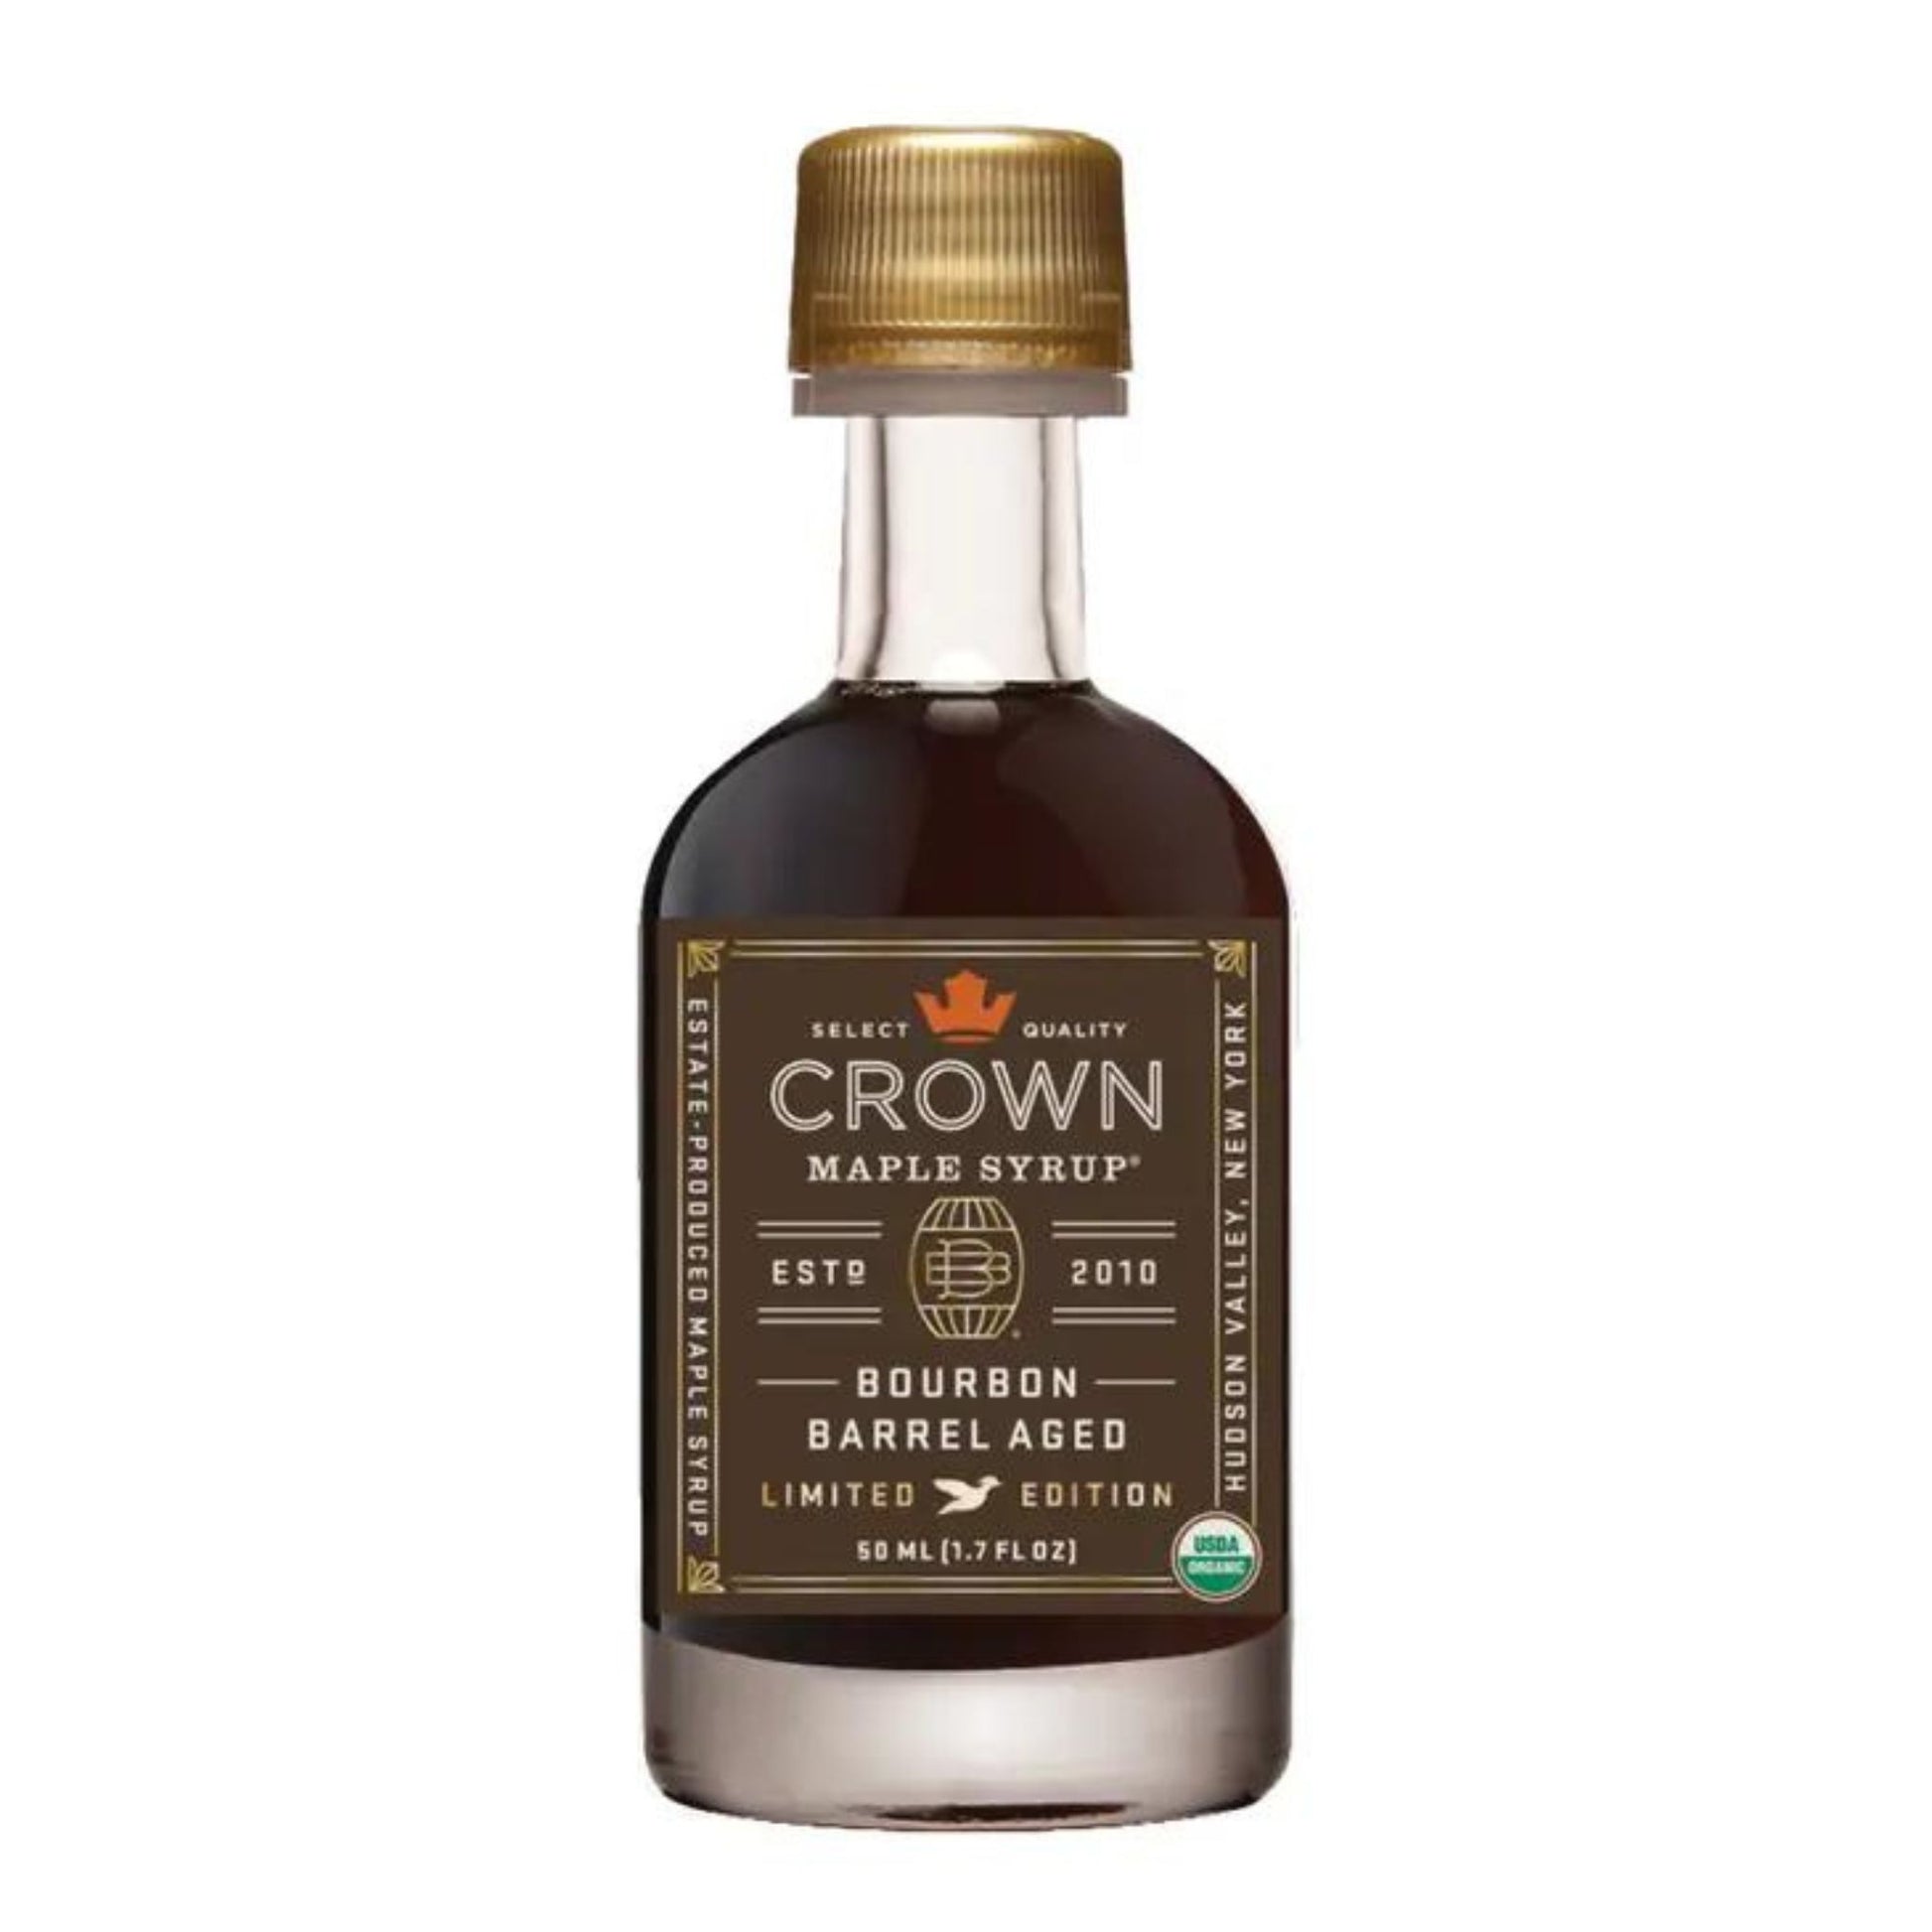 Bourbon Barrel Aged Organic Maple Syrup in a Glass Bottle. 1,7 Oz. Aromas of bourbon, smoky oak, graham cracker, brown butter & creamy vanilla. Front View of the Bottle